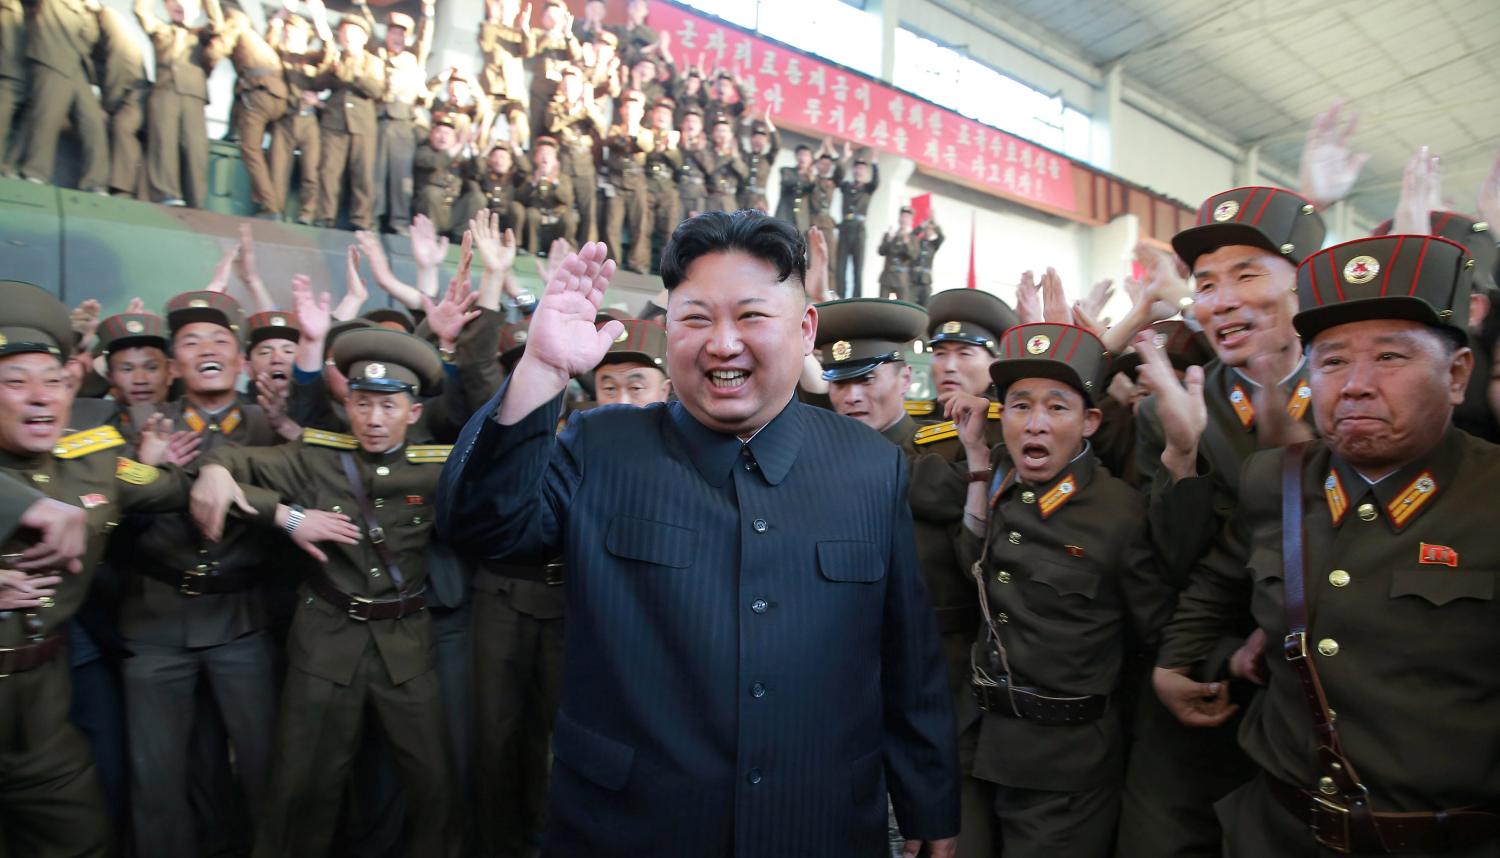 North Korean leader Kim Jong Un reacts with members of the Korean People's Army in this undated photo released by North Korea's Korean Central News Agency (KCNA) on May 15, 2017. KCNA via REUTERS REUTERS ATTENTION EDITORS - THIS IMAGE WAS PROVIDED BY A THIRD PARTY. EDITORIAL USE ONLY. REUTERS IS UNABLE TO INDEPENDENTLY VERIFY THIS IMAGE. NO THIRD PARTY SALES. SOUTH KOREA OUT. - RTX35VOI